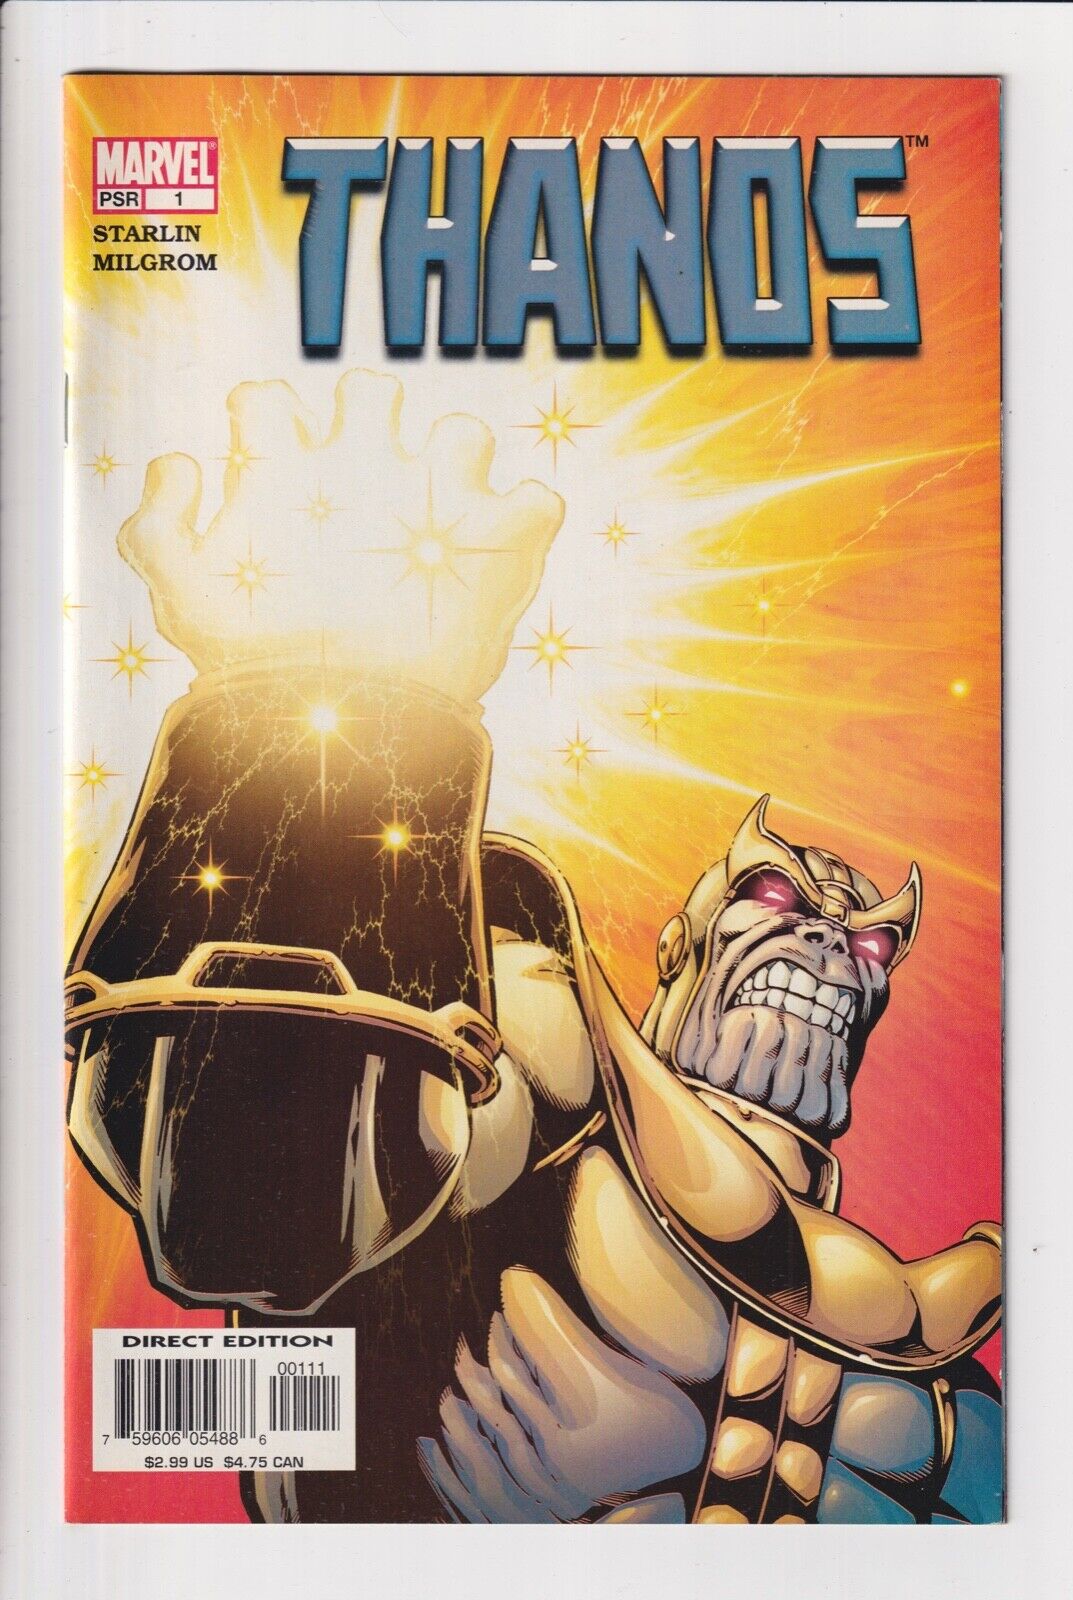 CLEARANCE BIN: THANOS 1-12 VG 2003 Marvel comics sold SEPARATELY you PICK